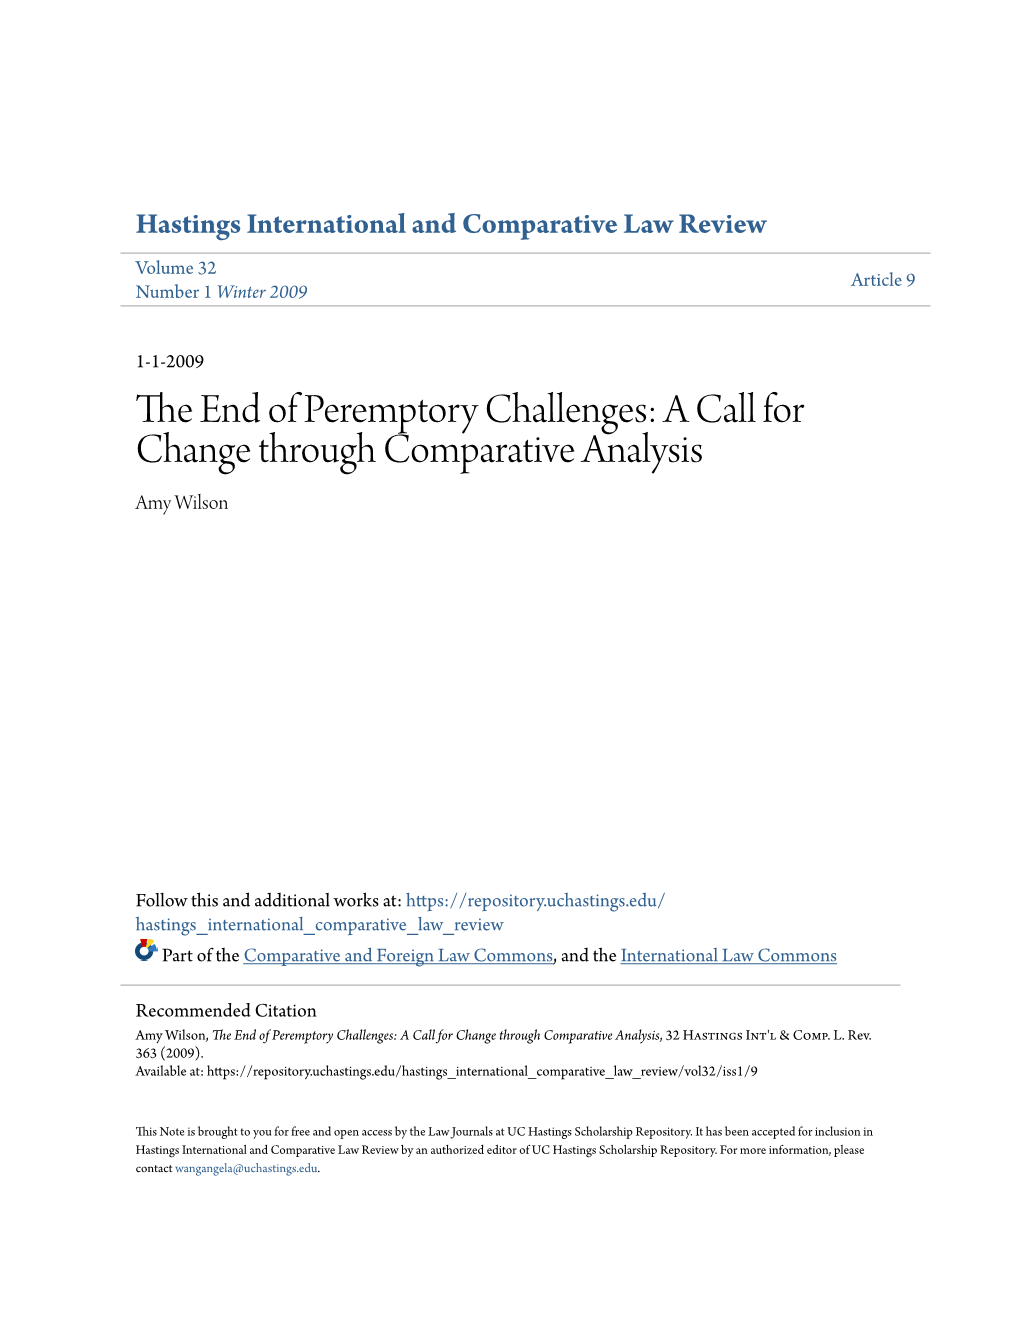 The End of Peremptory Challenges: a Call for Change Through Comparative Analysis, 32 Hastings Int'l & Comp